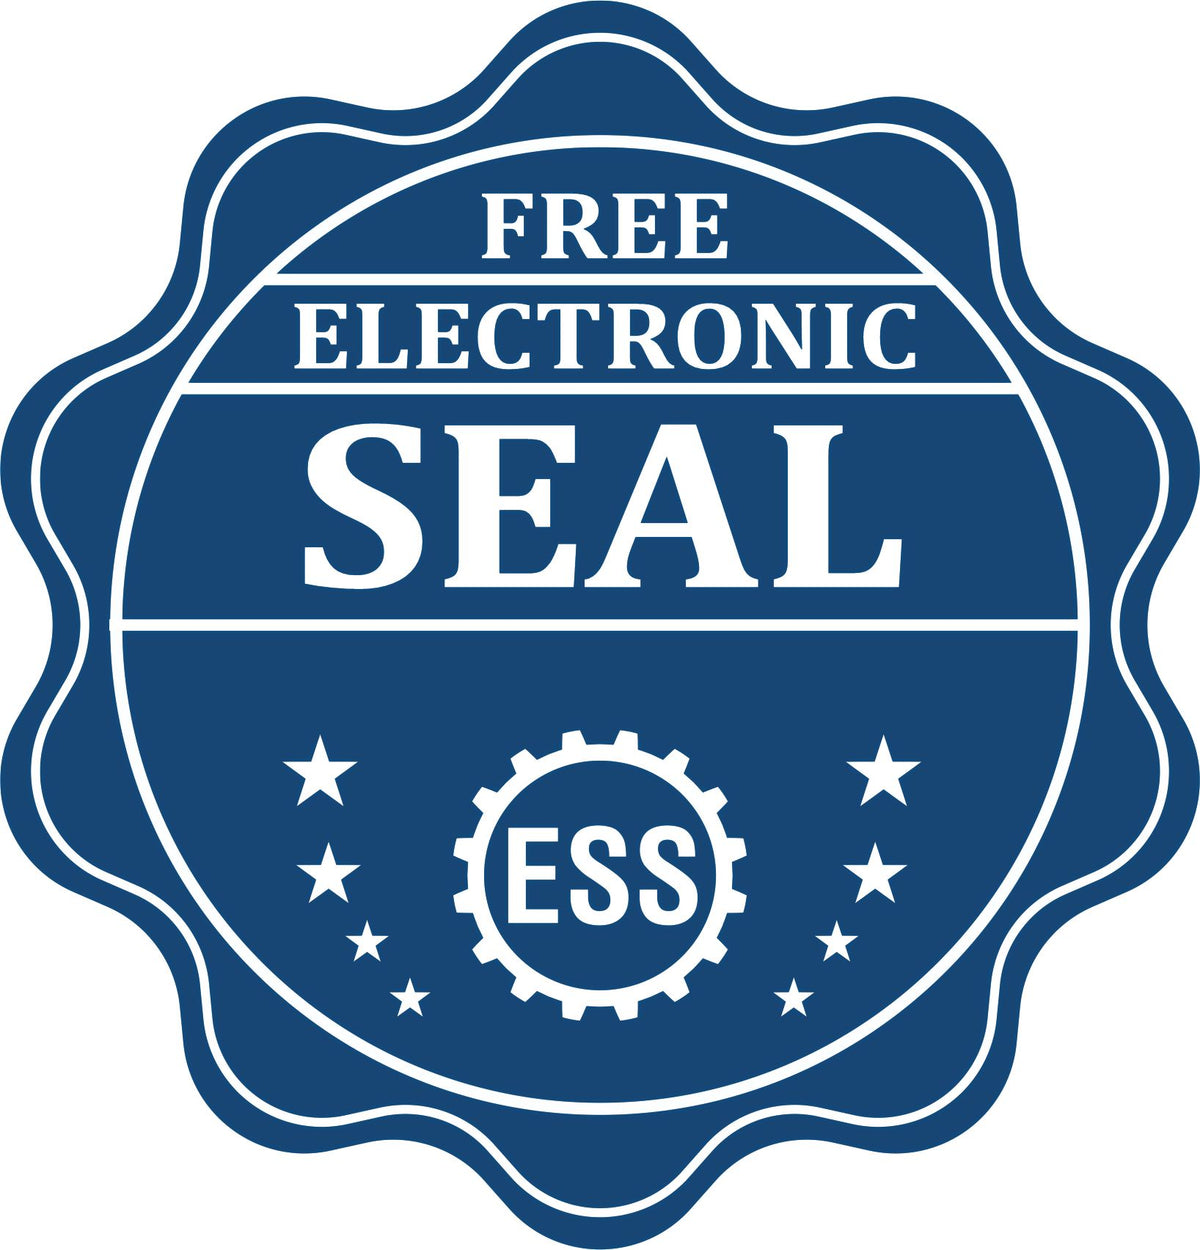 A badge showing a free electronic seal for the New Jersey Engineer Desk Seal with stars and the ESS gear on the emblem.